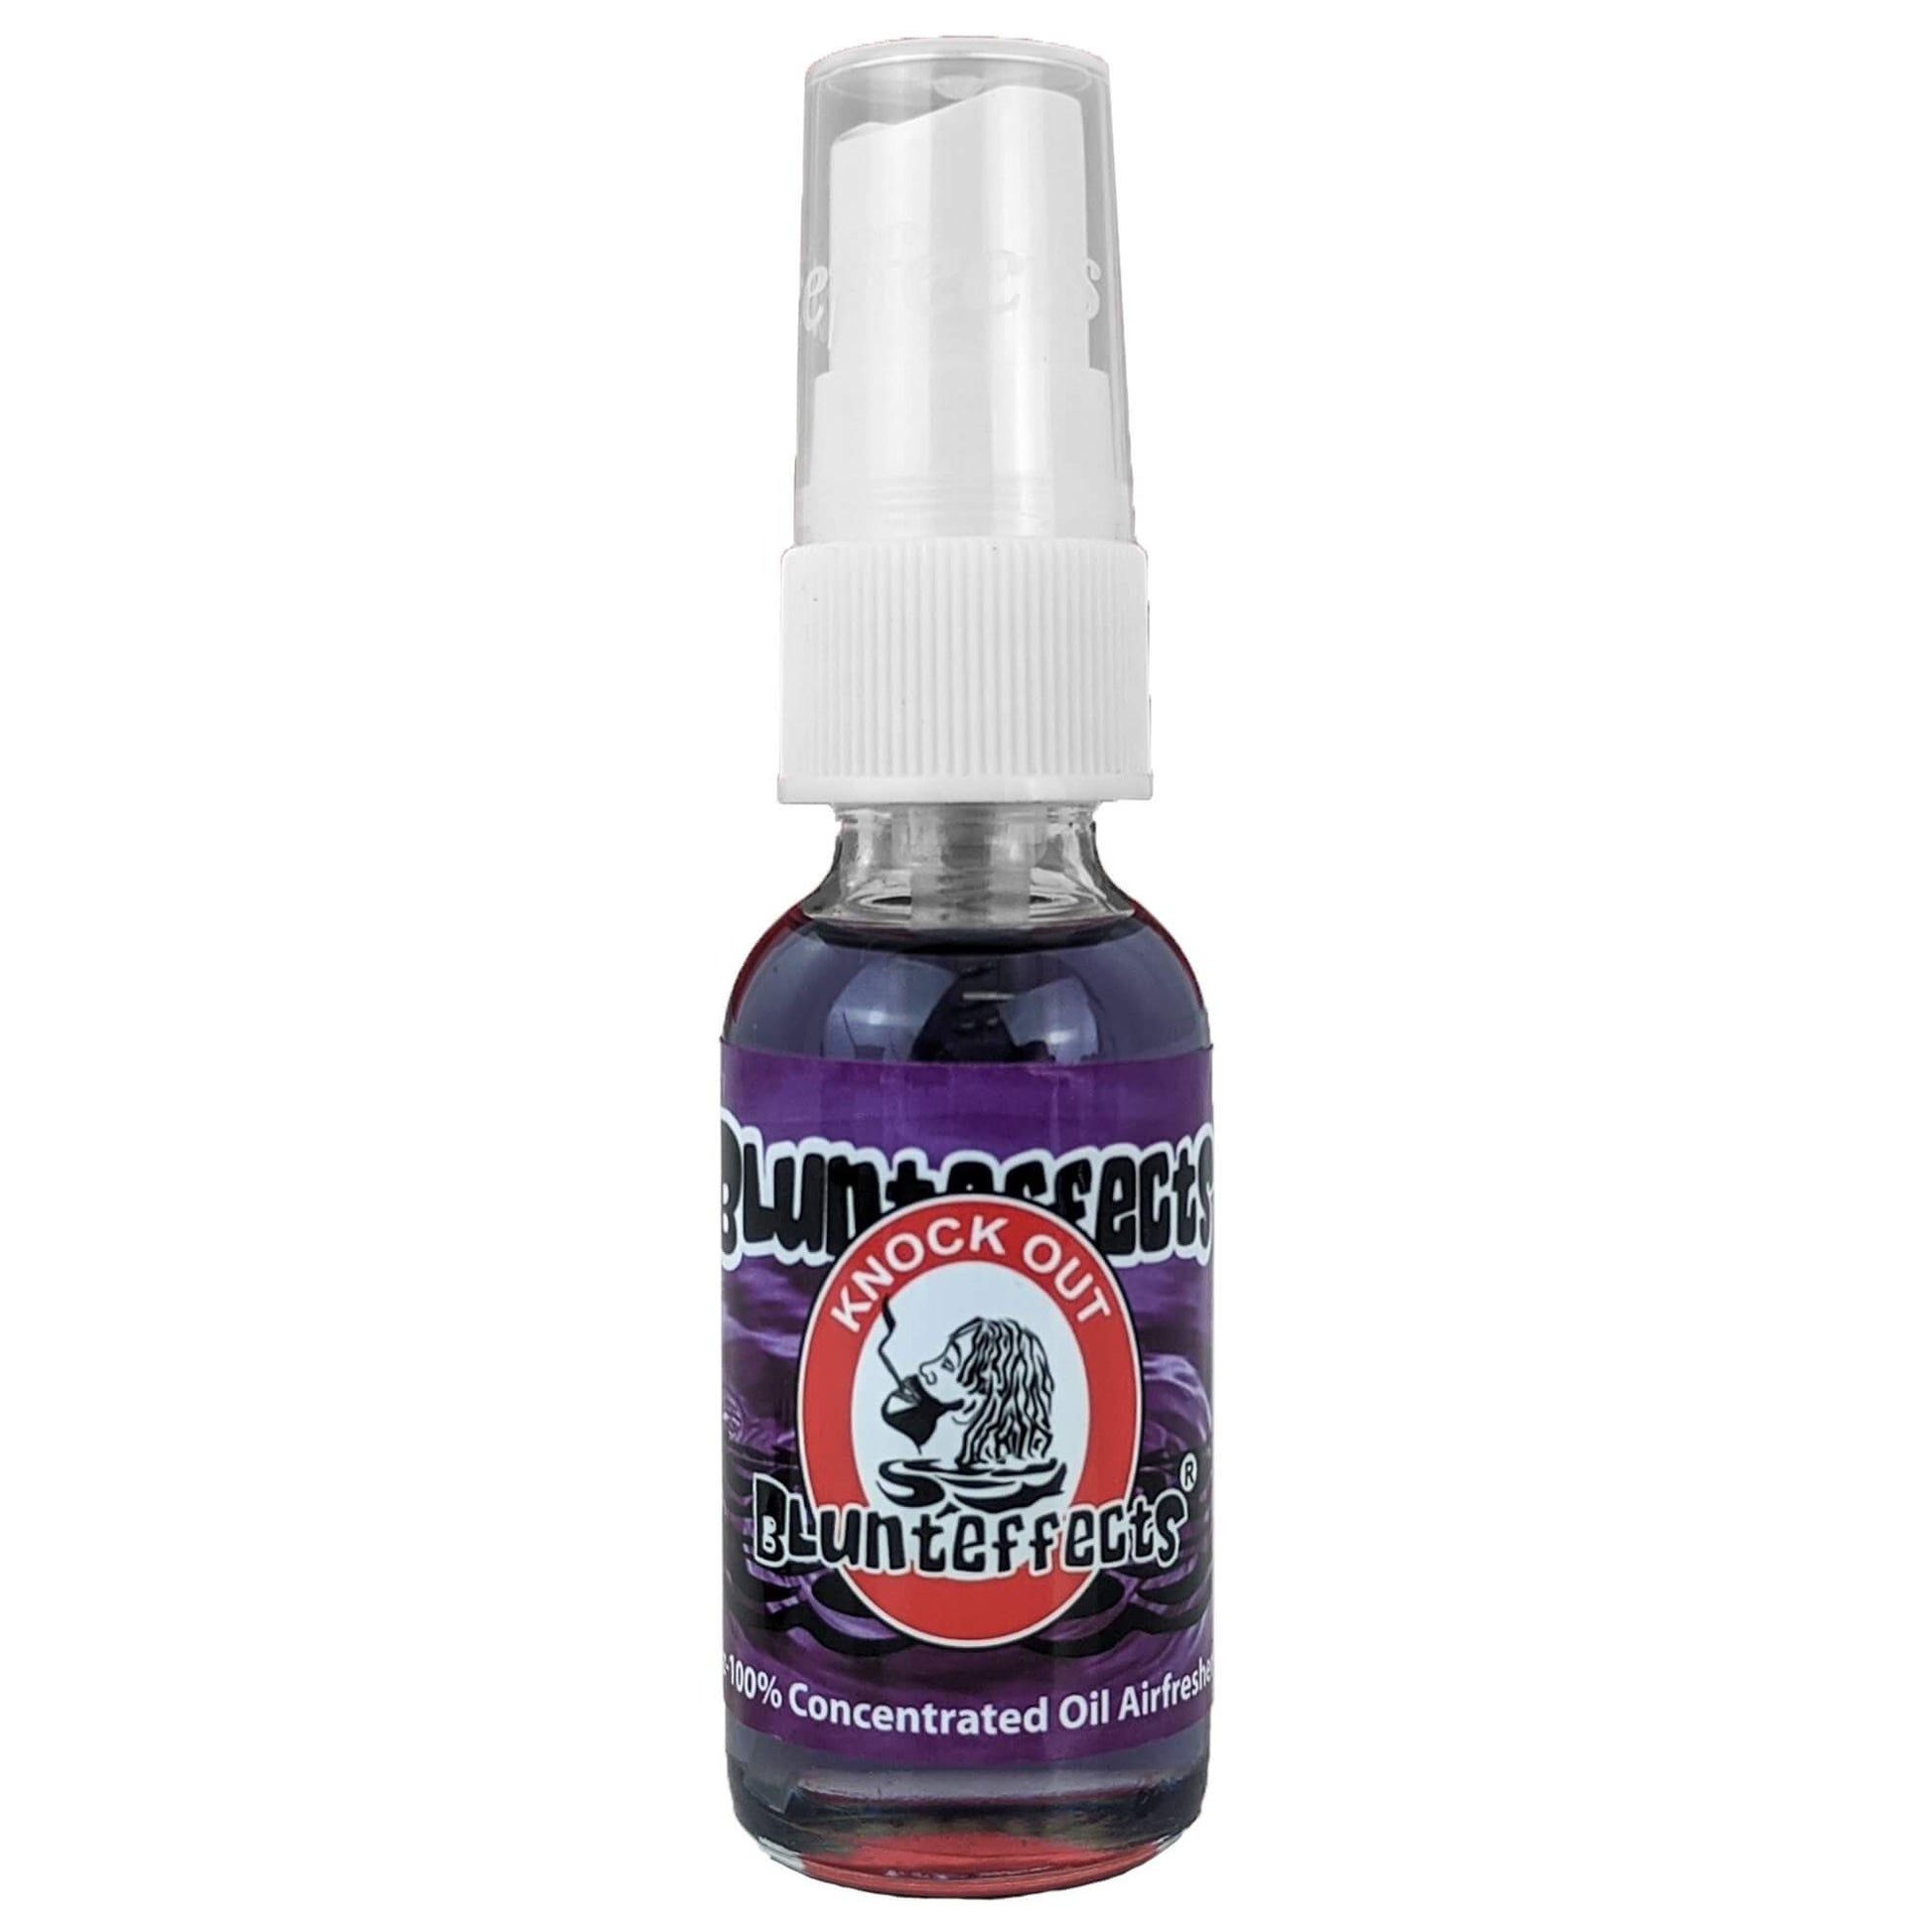 BluntEffects Air Freshener Spray, 1OZ Knock Out Scent